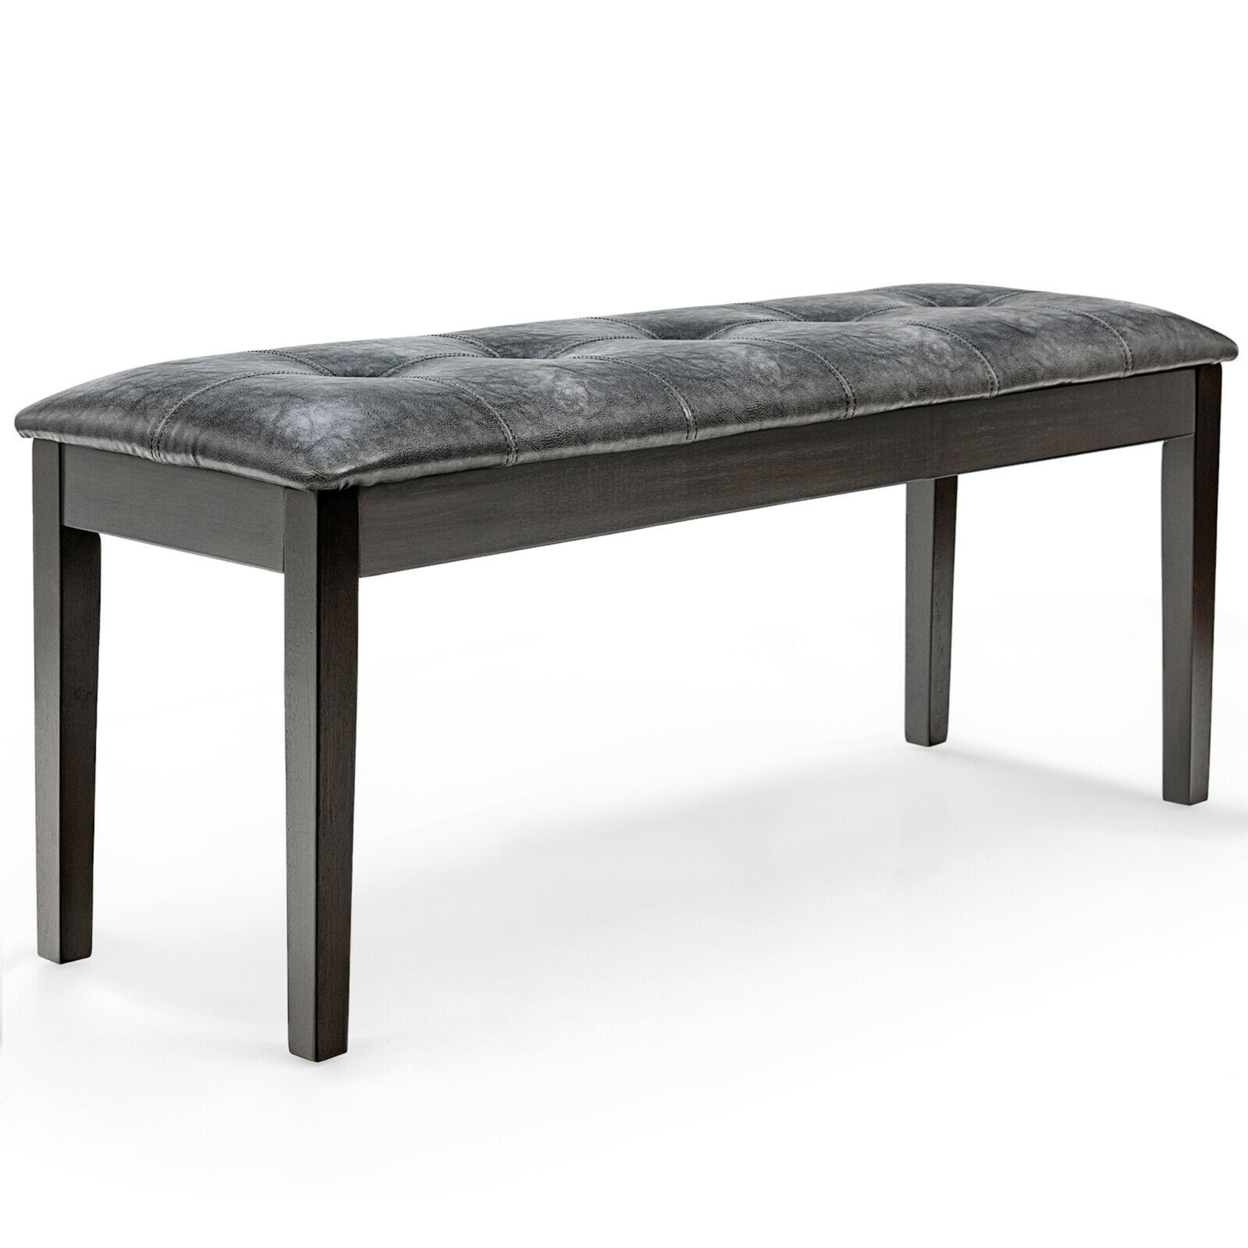 Upholstered Dining Bench W/Padded Seat For Kitchen Bedroom Entryway Grey